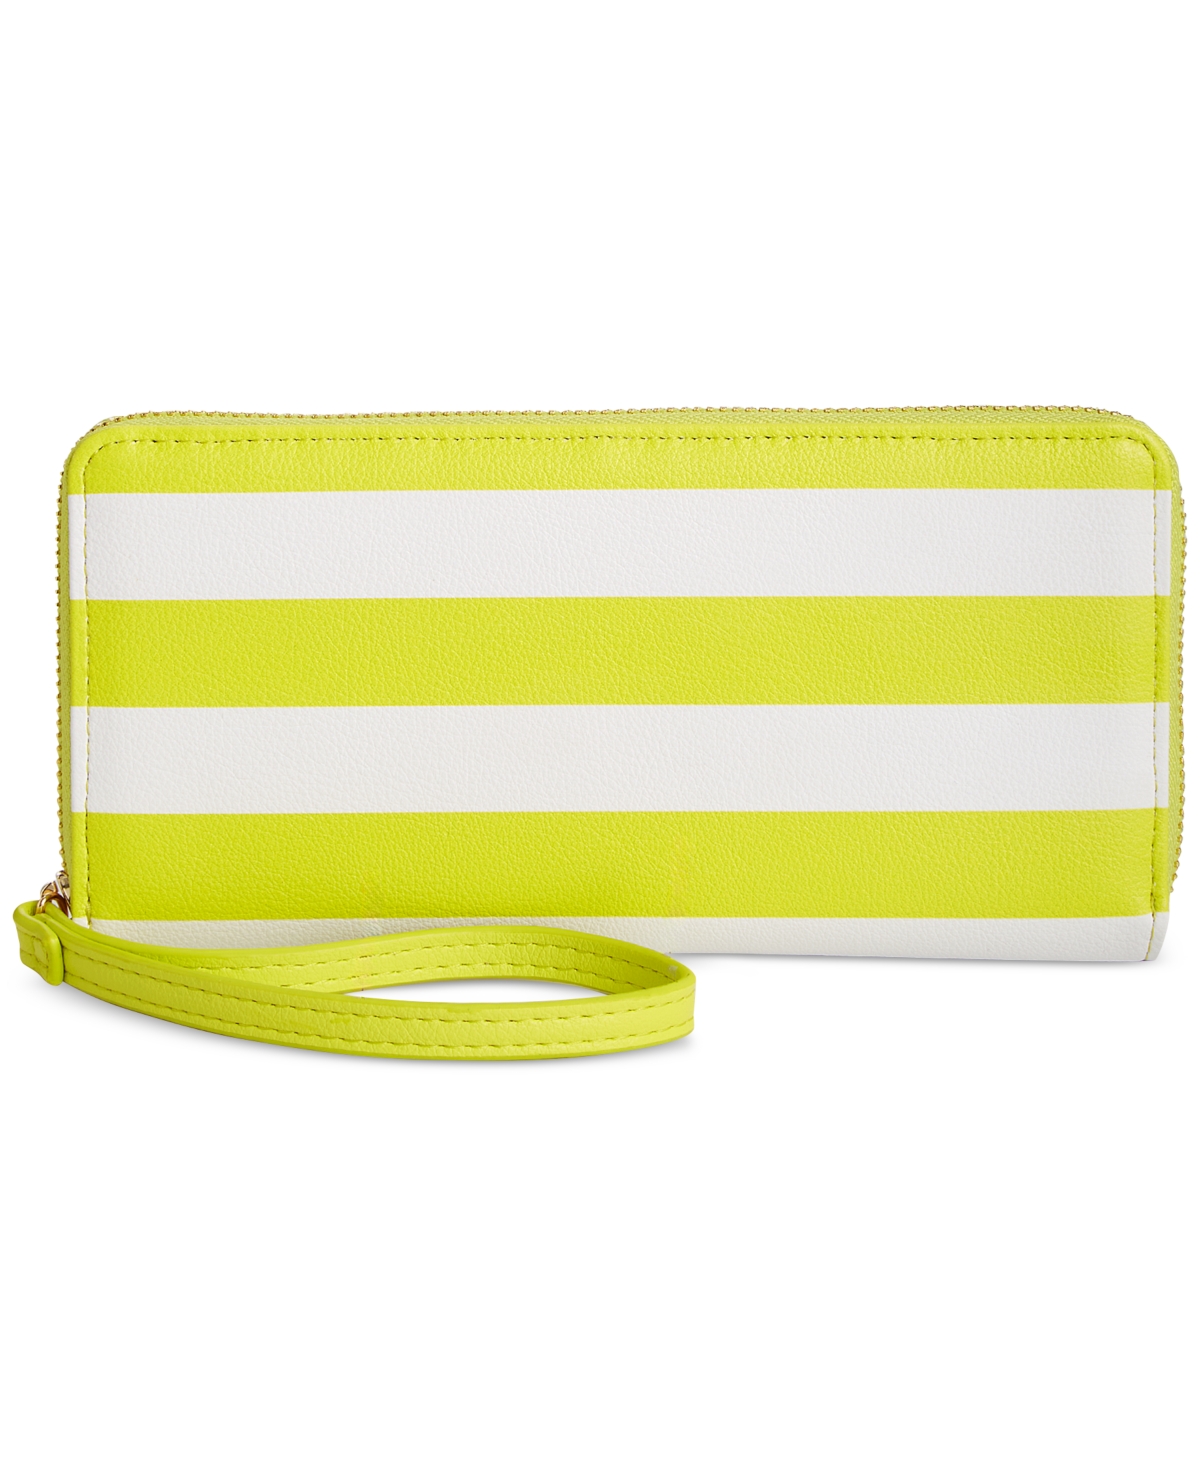 Angii Zip Around Printed Wallet, Created for Macy's - Lemonlime/white